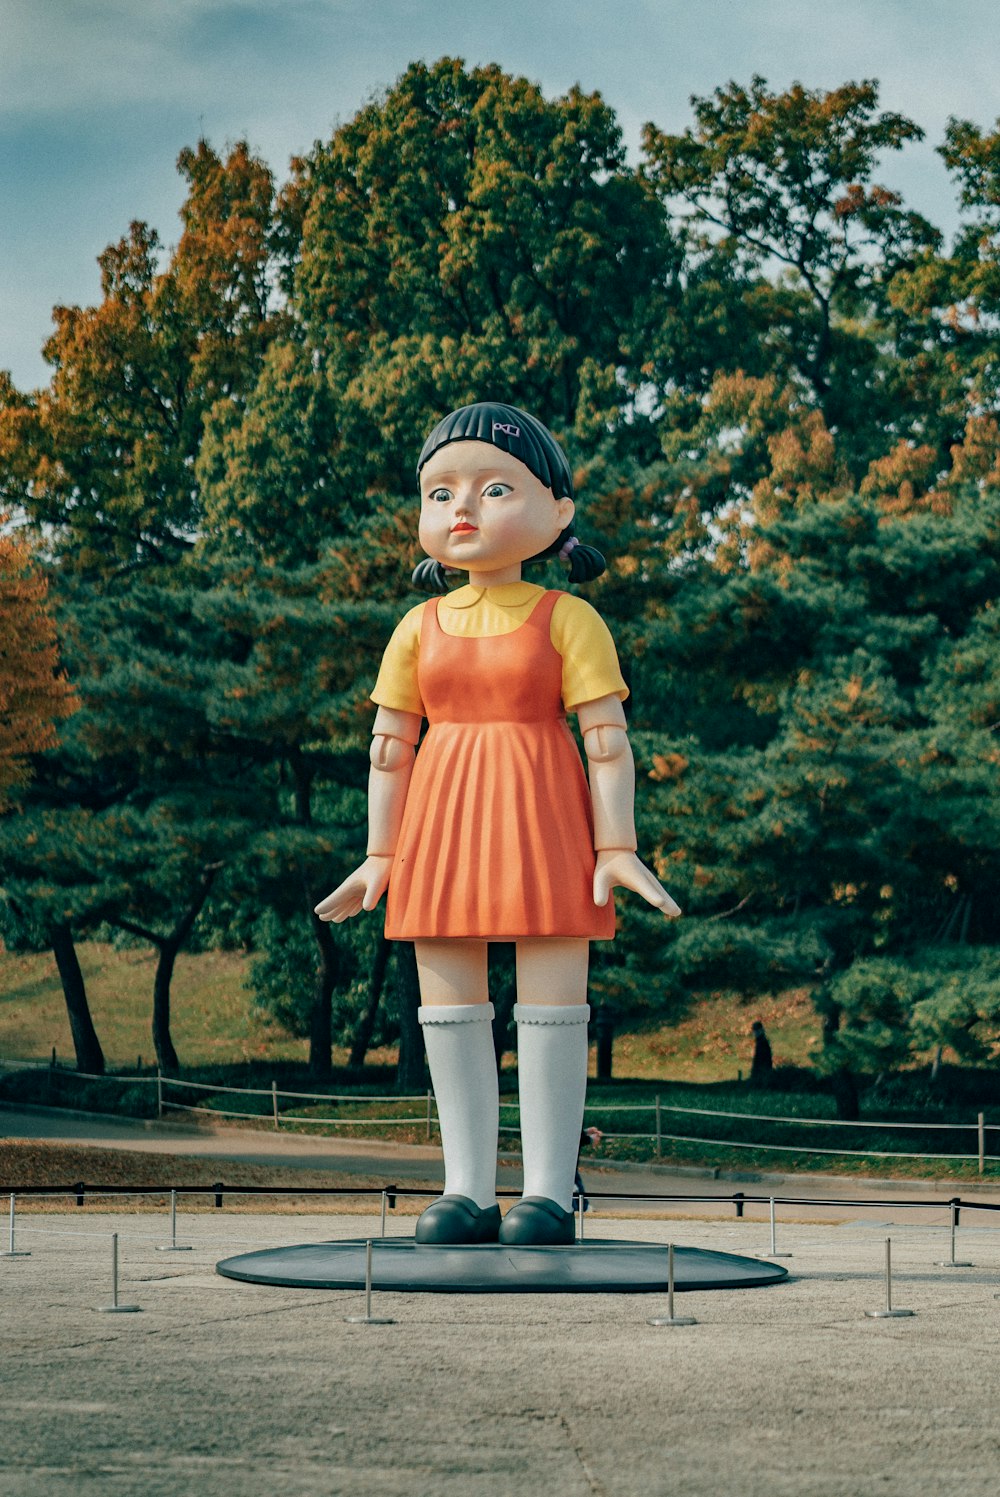 a statue of a girl in an orange dress